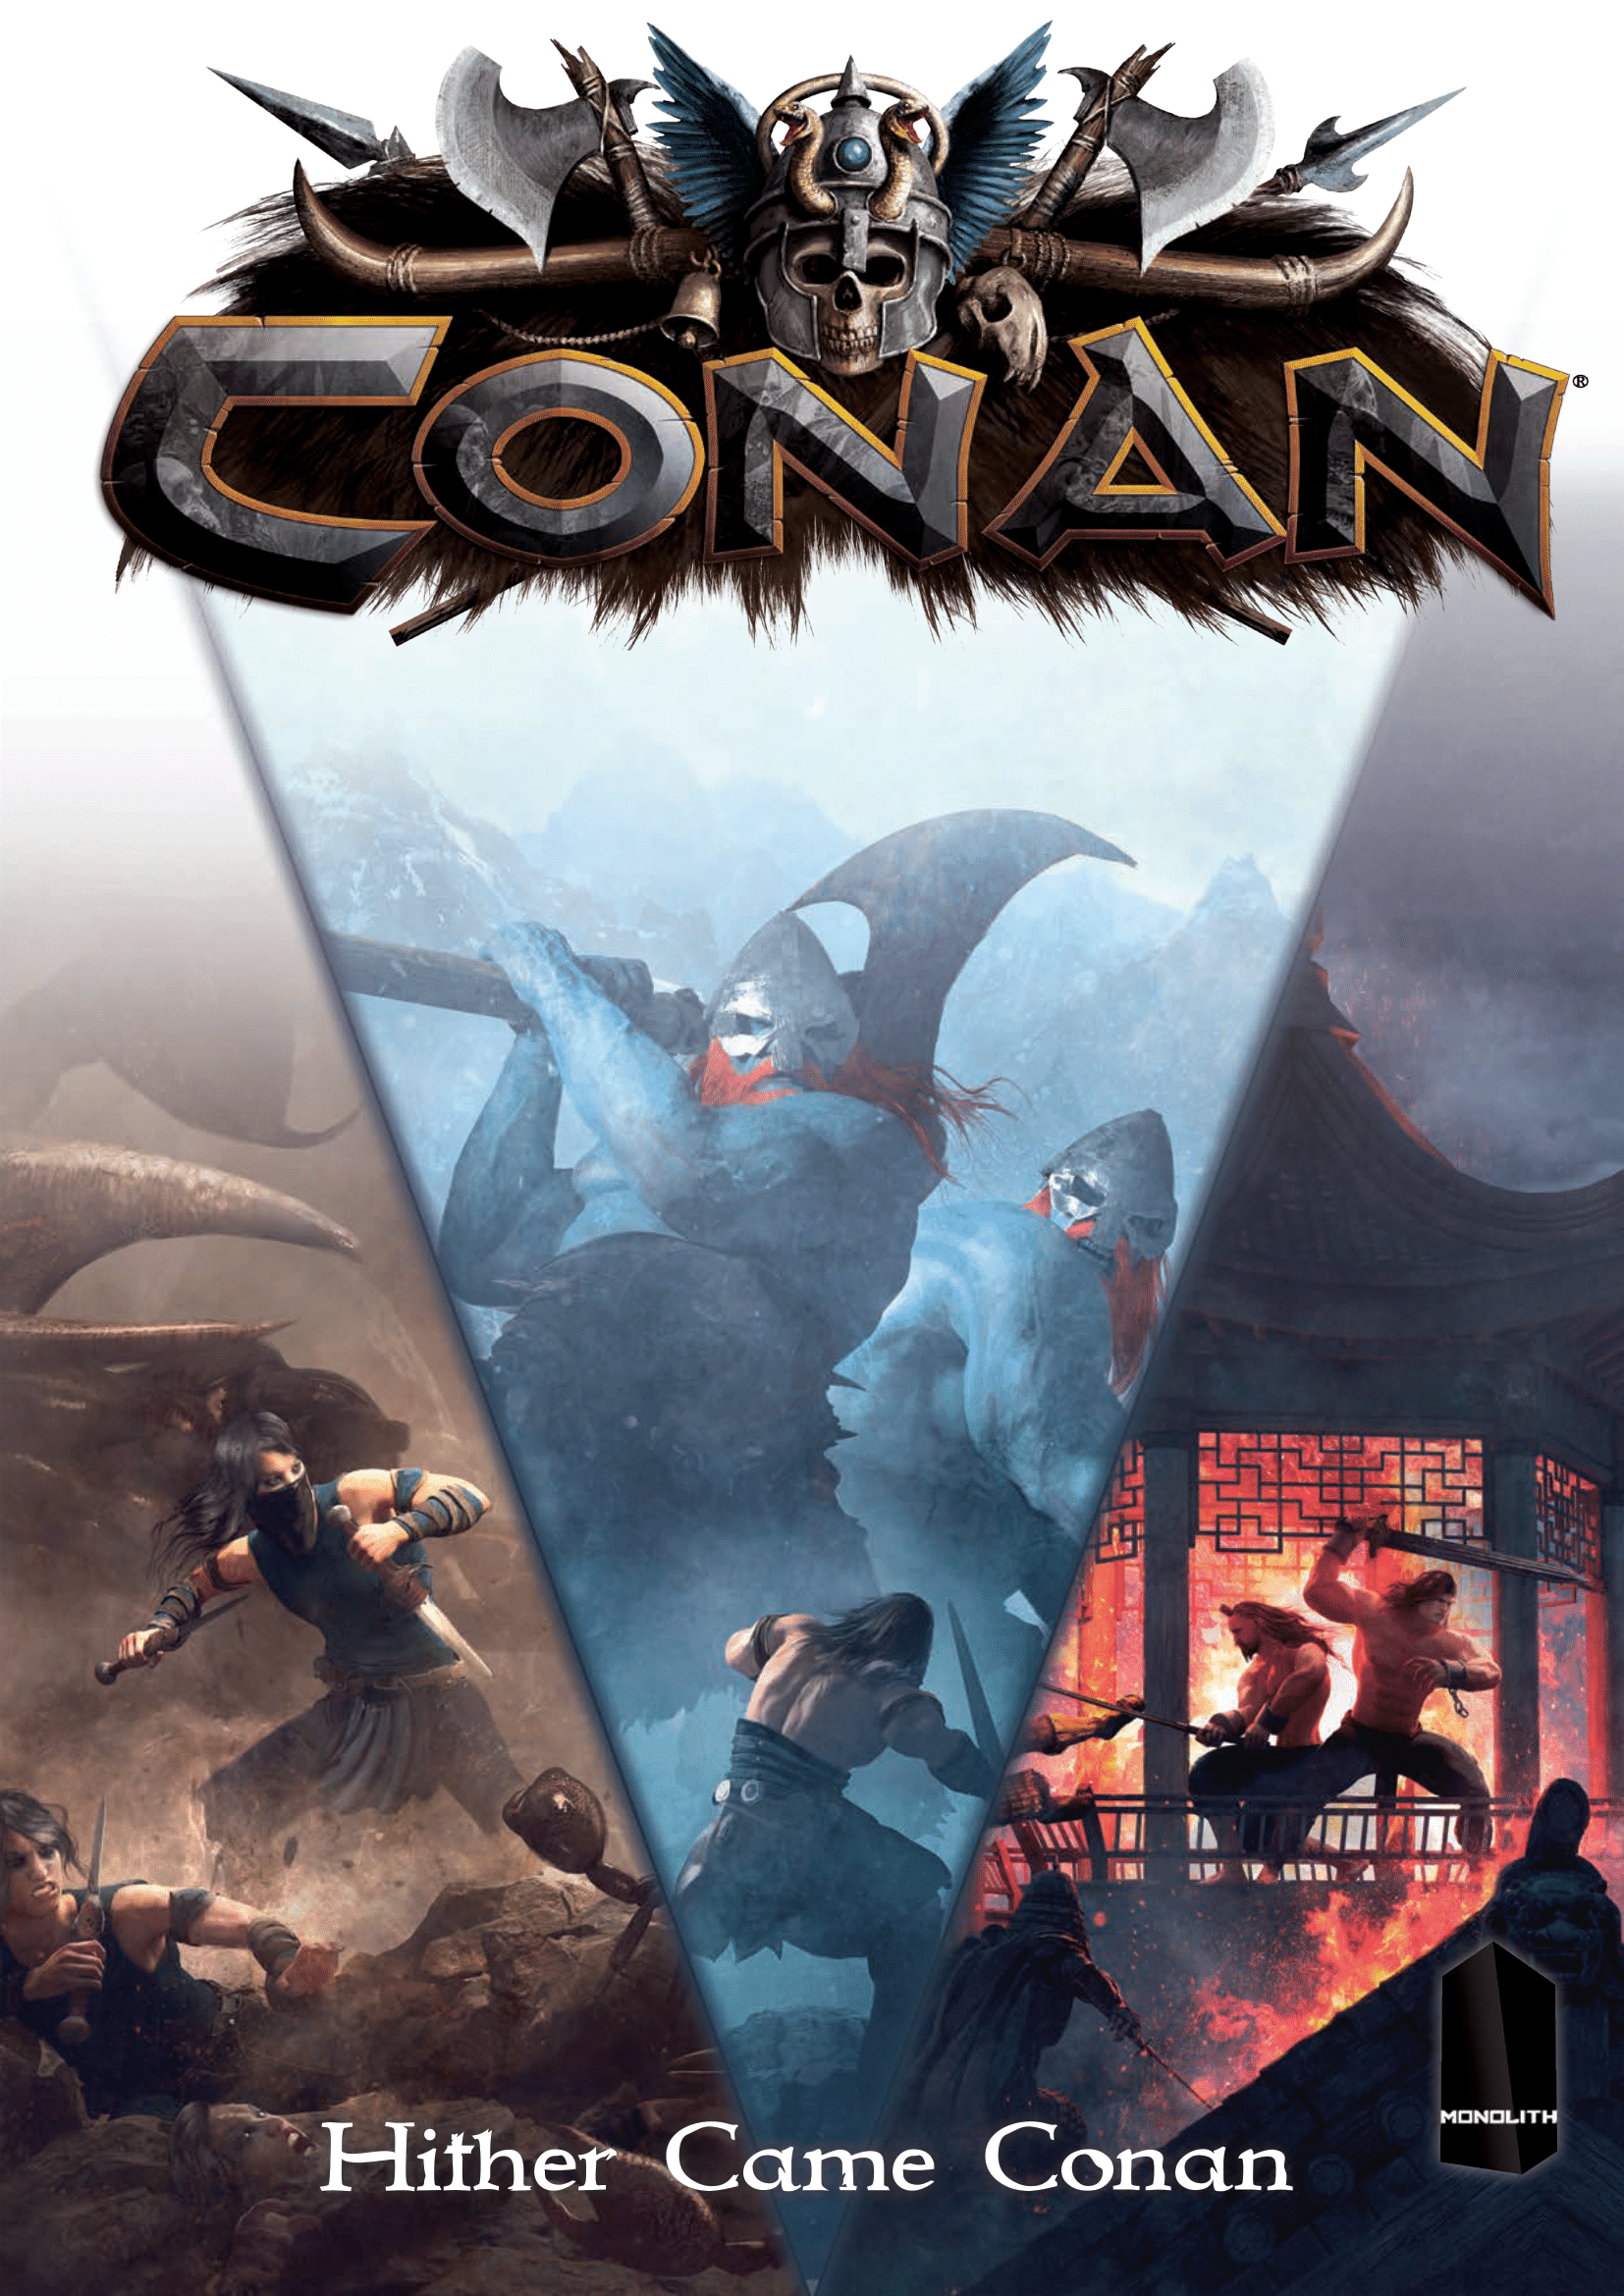 Solo/Coop Campaign "Hither came Conan" - WEB Version ENG